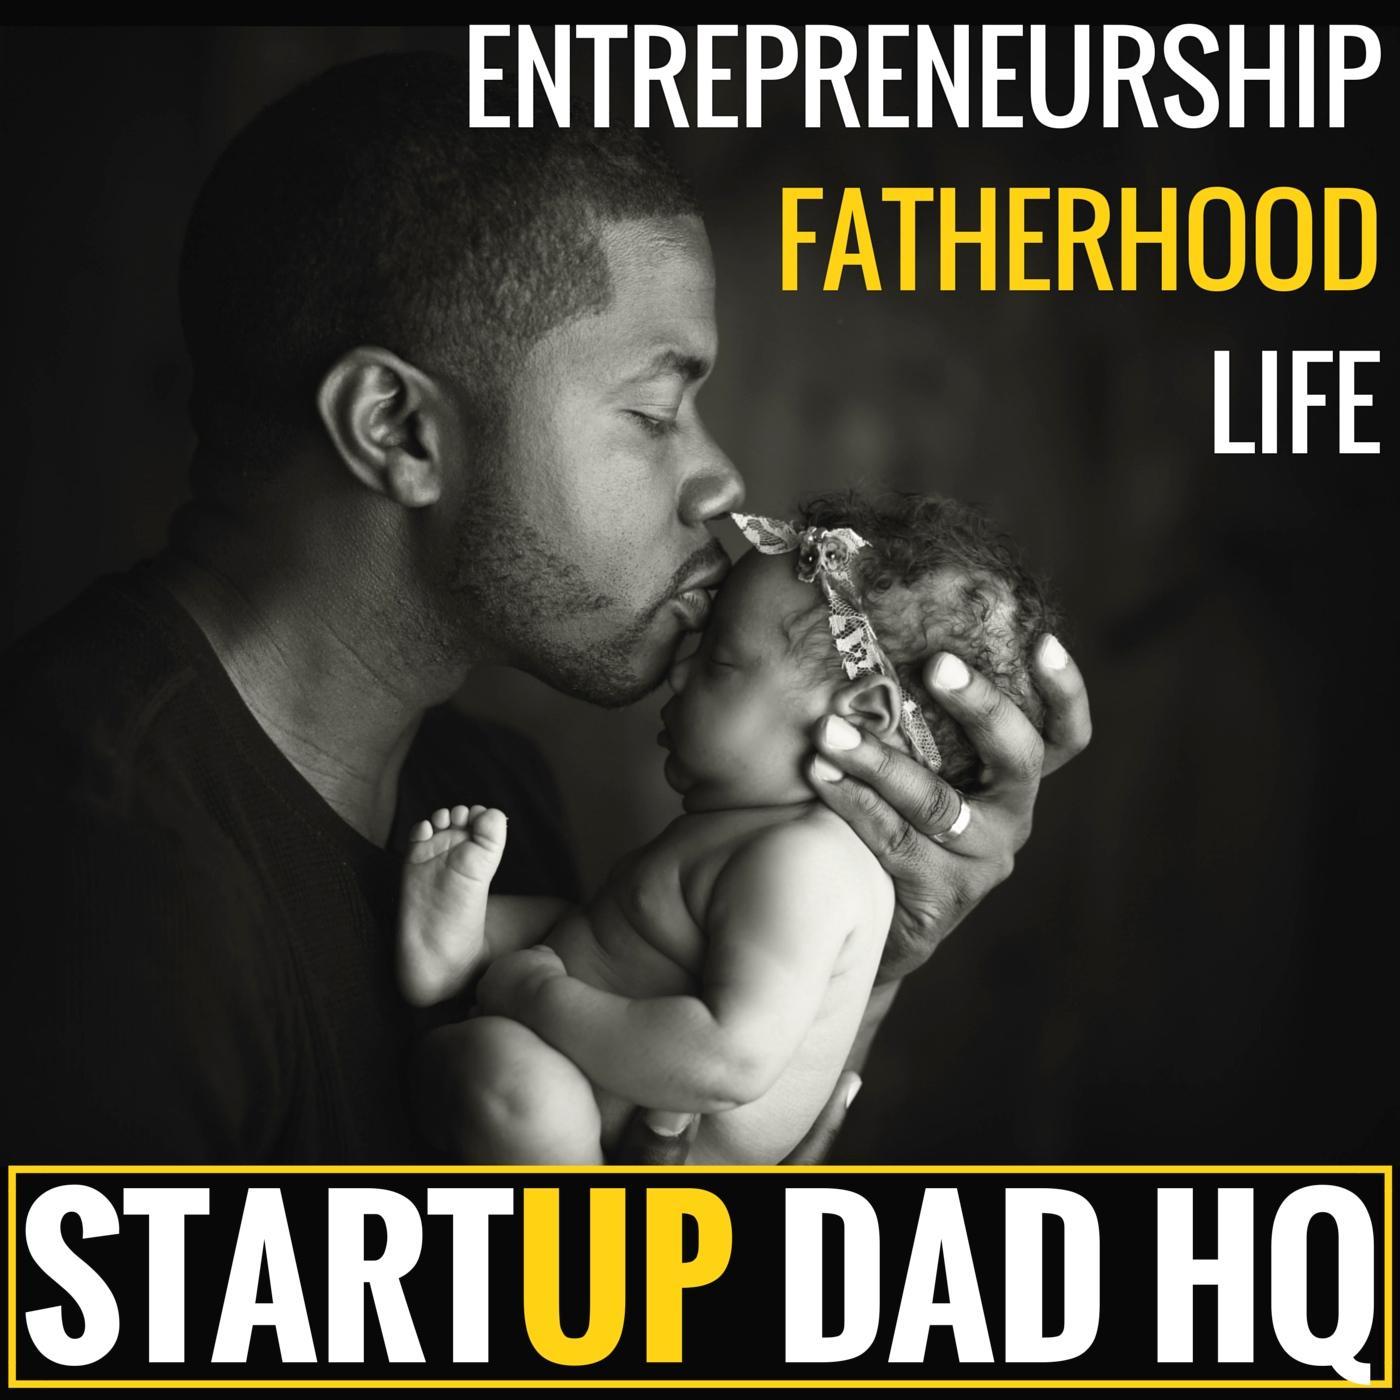 Husband | Father of 3 | Founder of Startup Dad Headquarters - a 2 days/week #Podcast focused on the intersection of #Fatherhood & #Entrepreneurship.